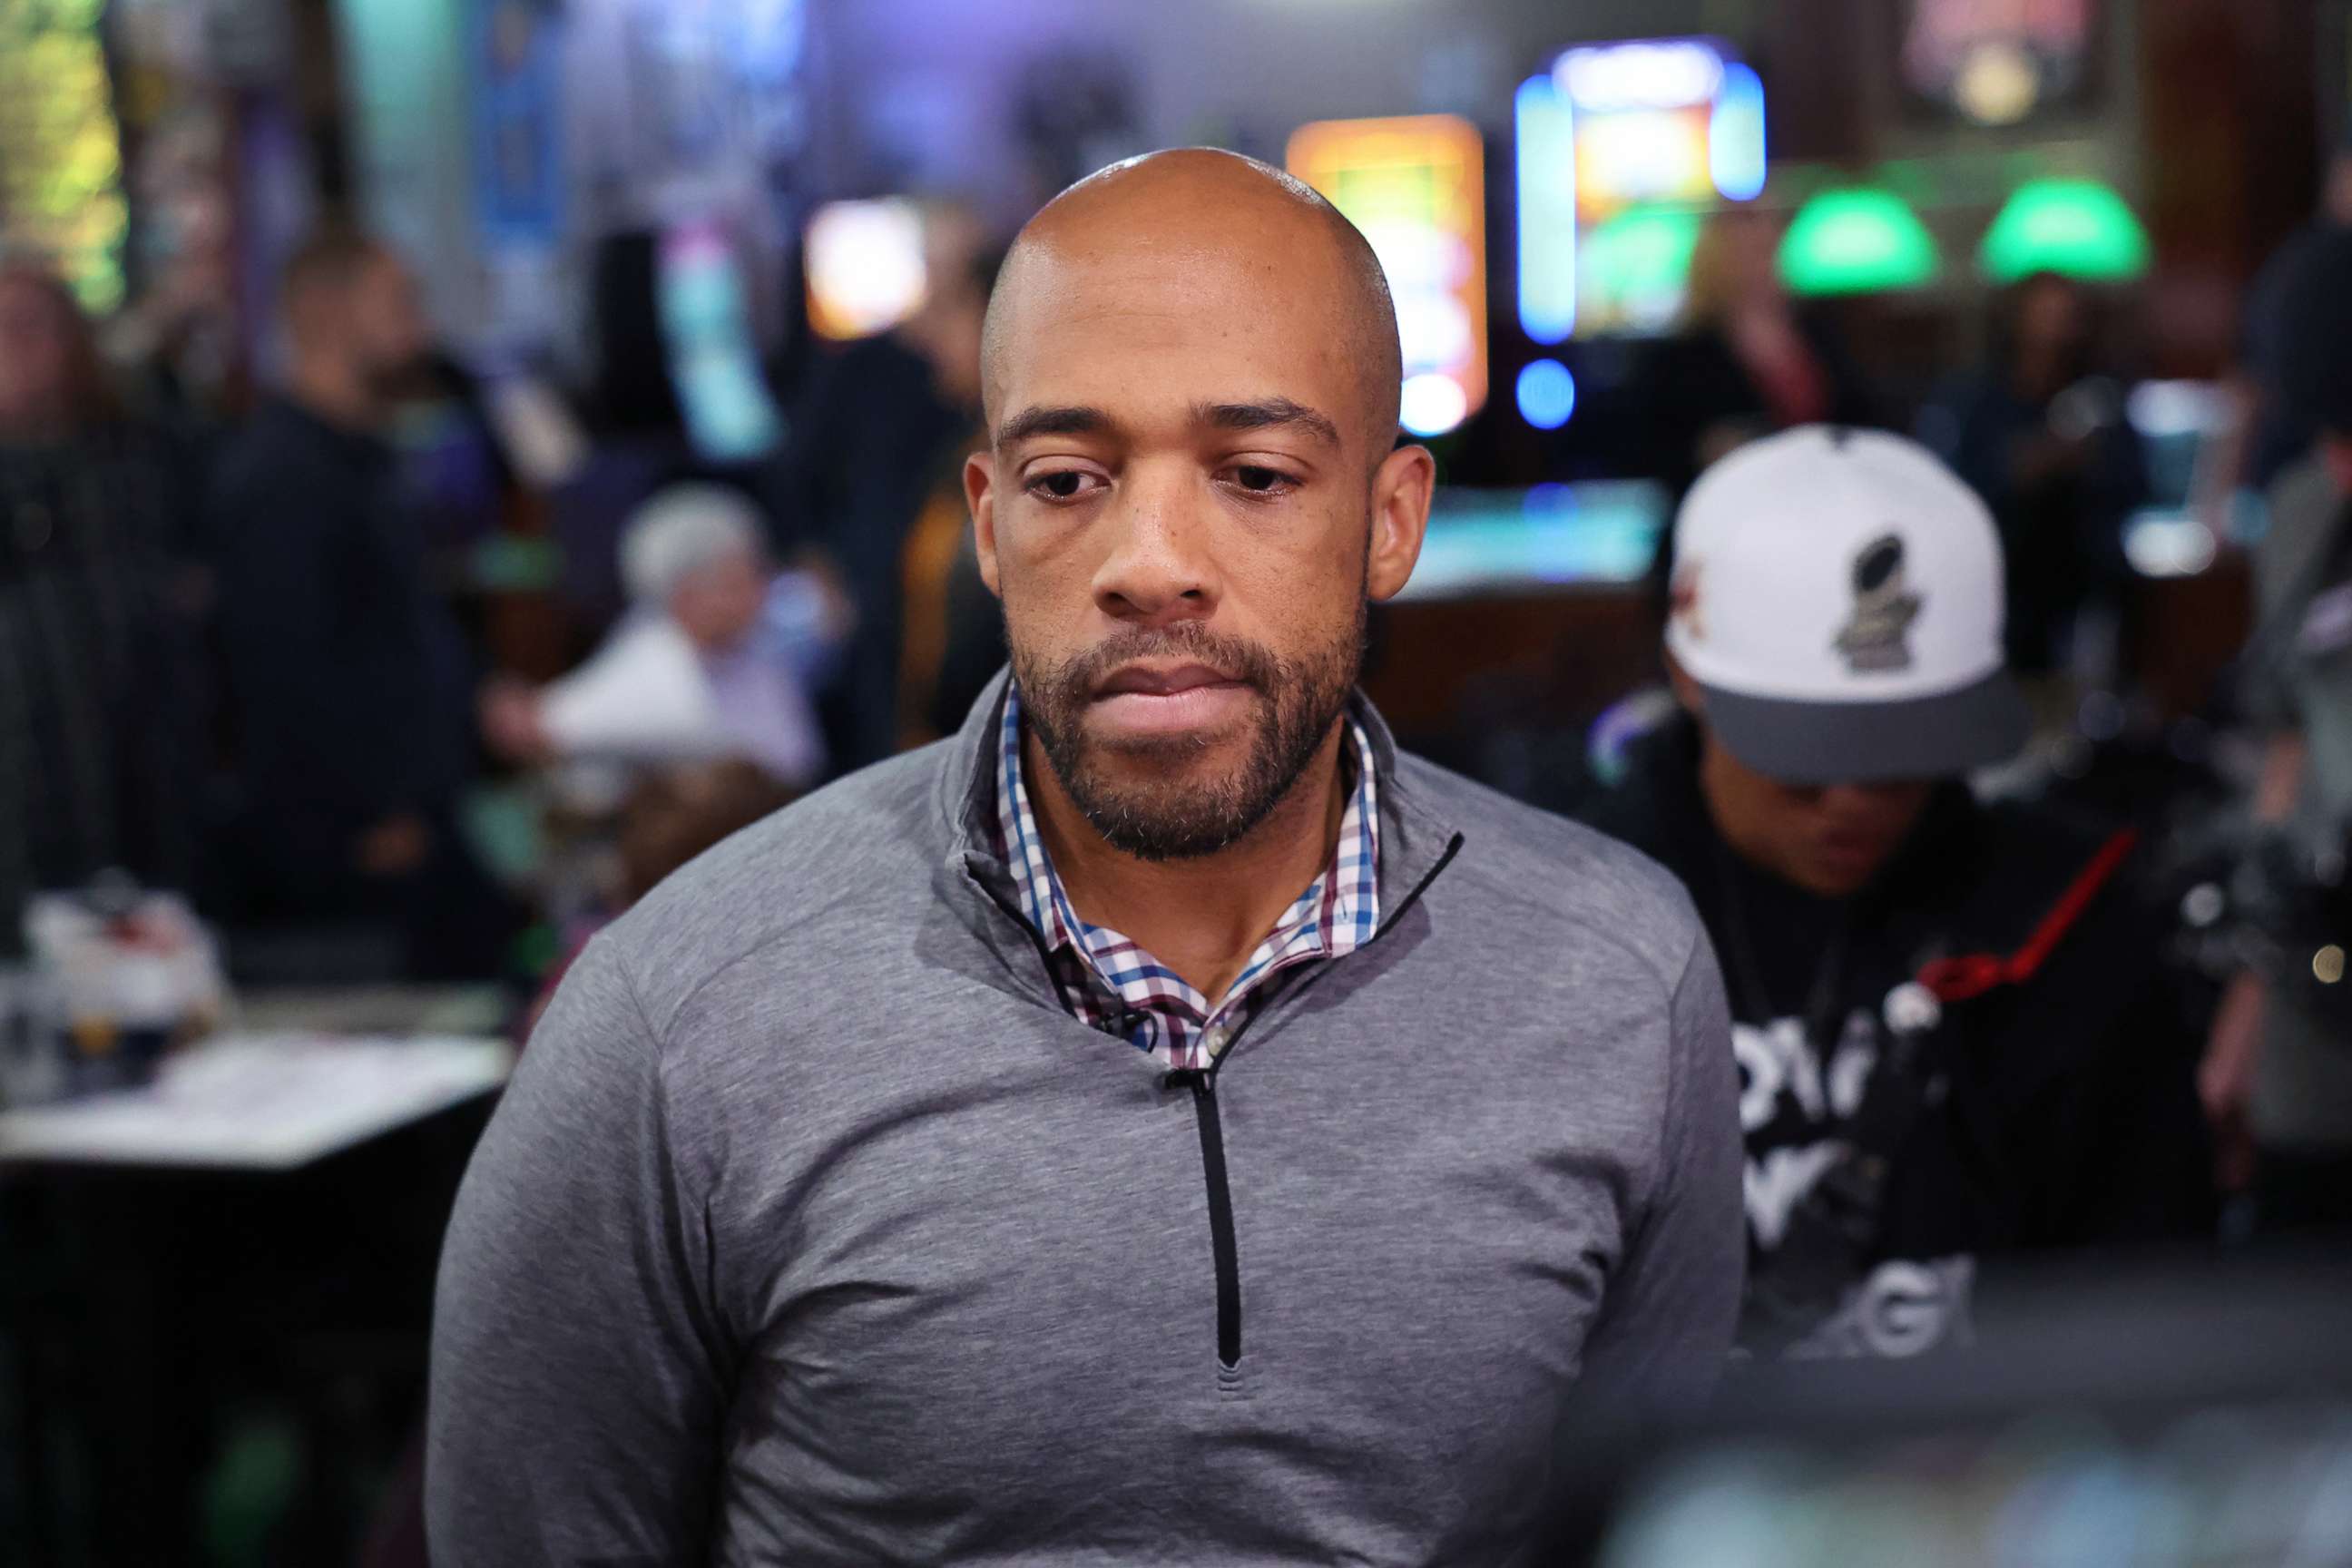 PHOTO: Democratic candidate for U.S. Senate in Wisconsin, Mandela Barnes speaks to reporters during a campaign stop at the Aris Sports Bar, Oct. 12, 2022, in West Allis, Wis. 